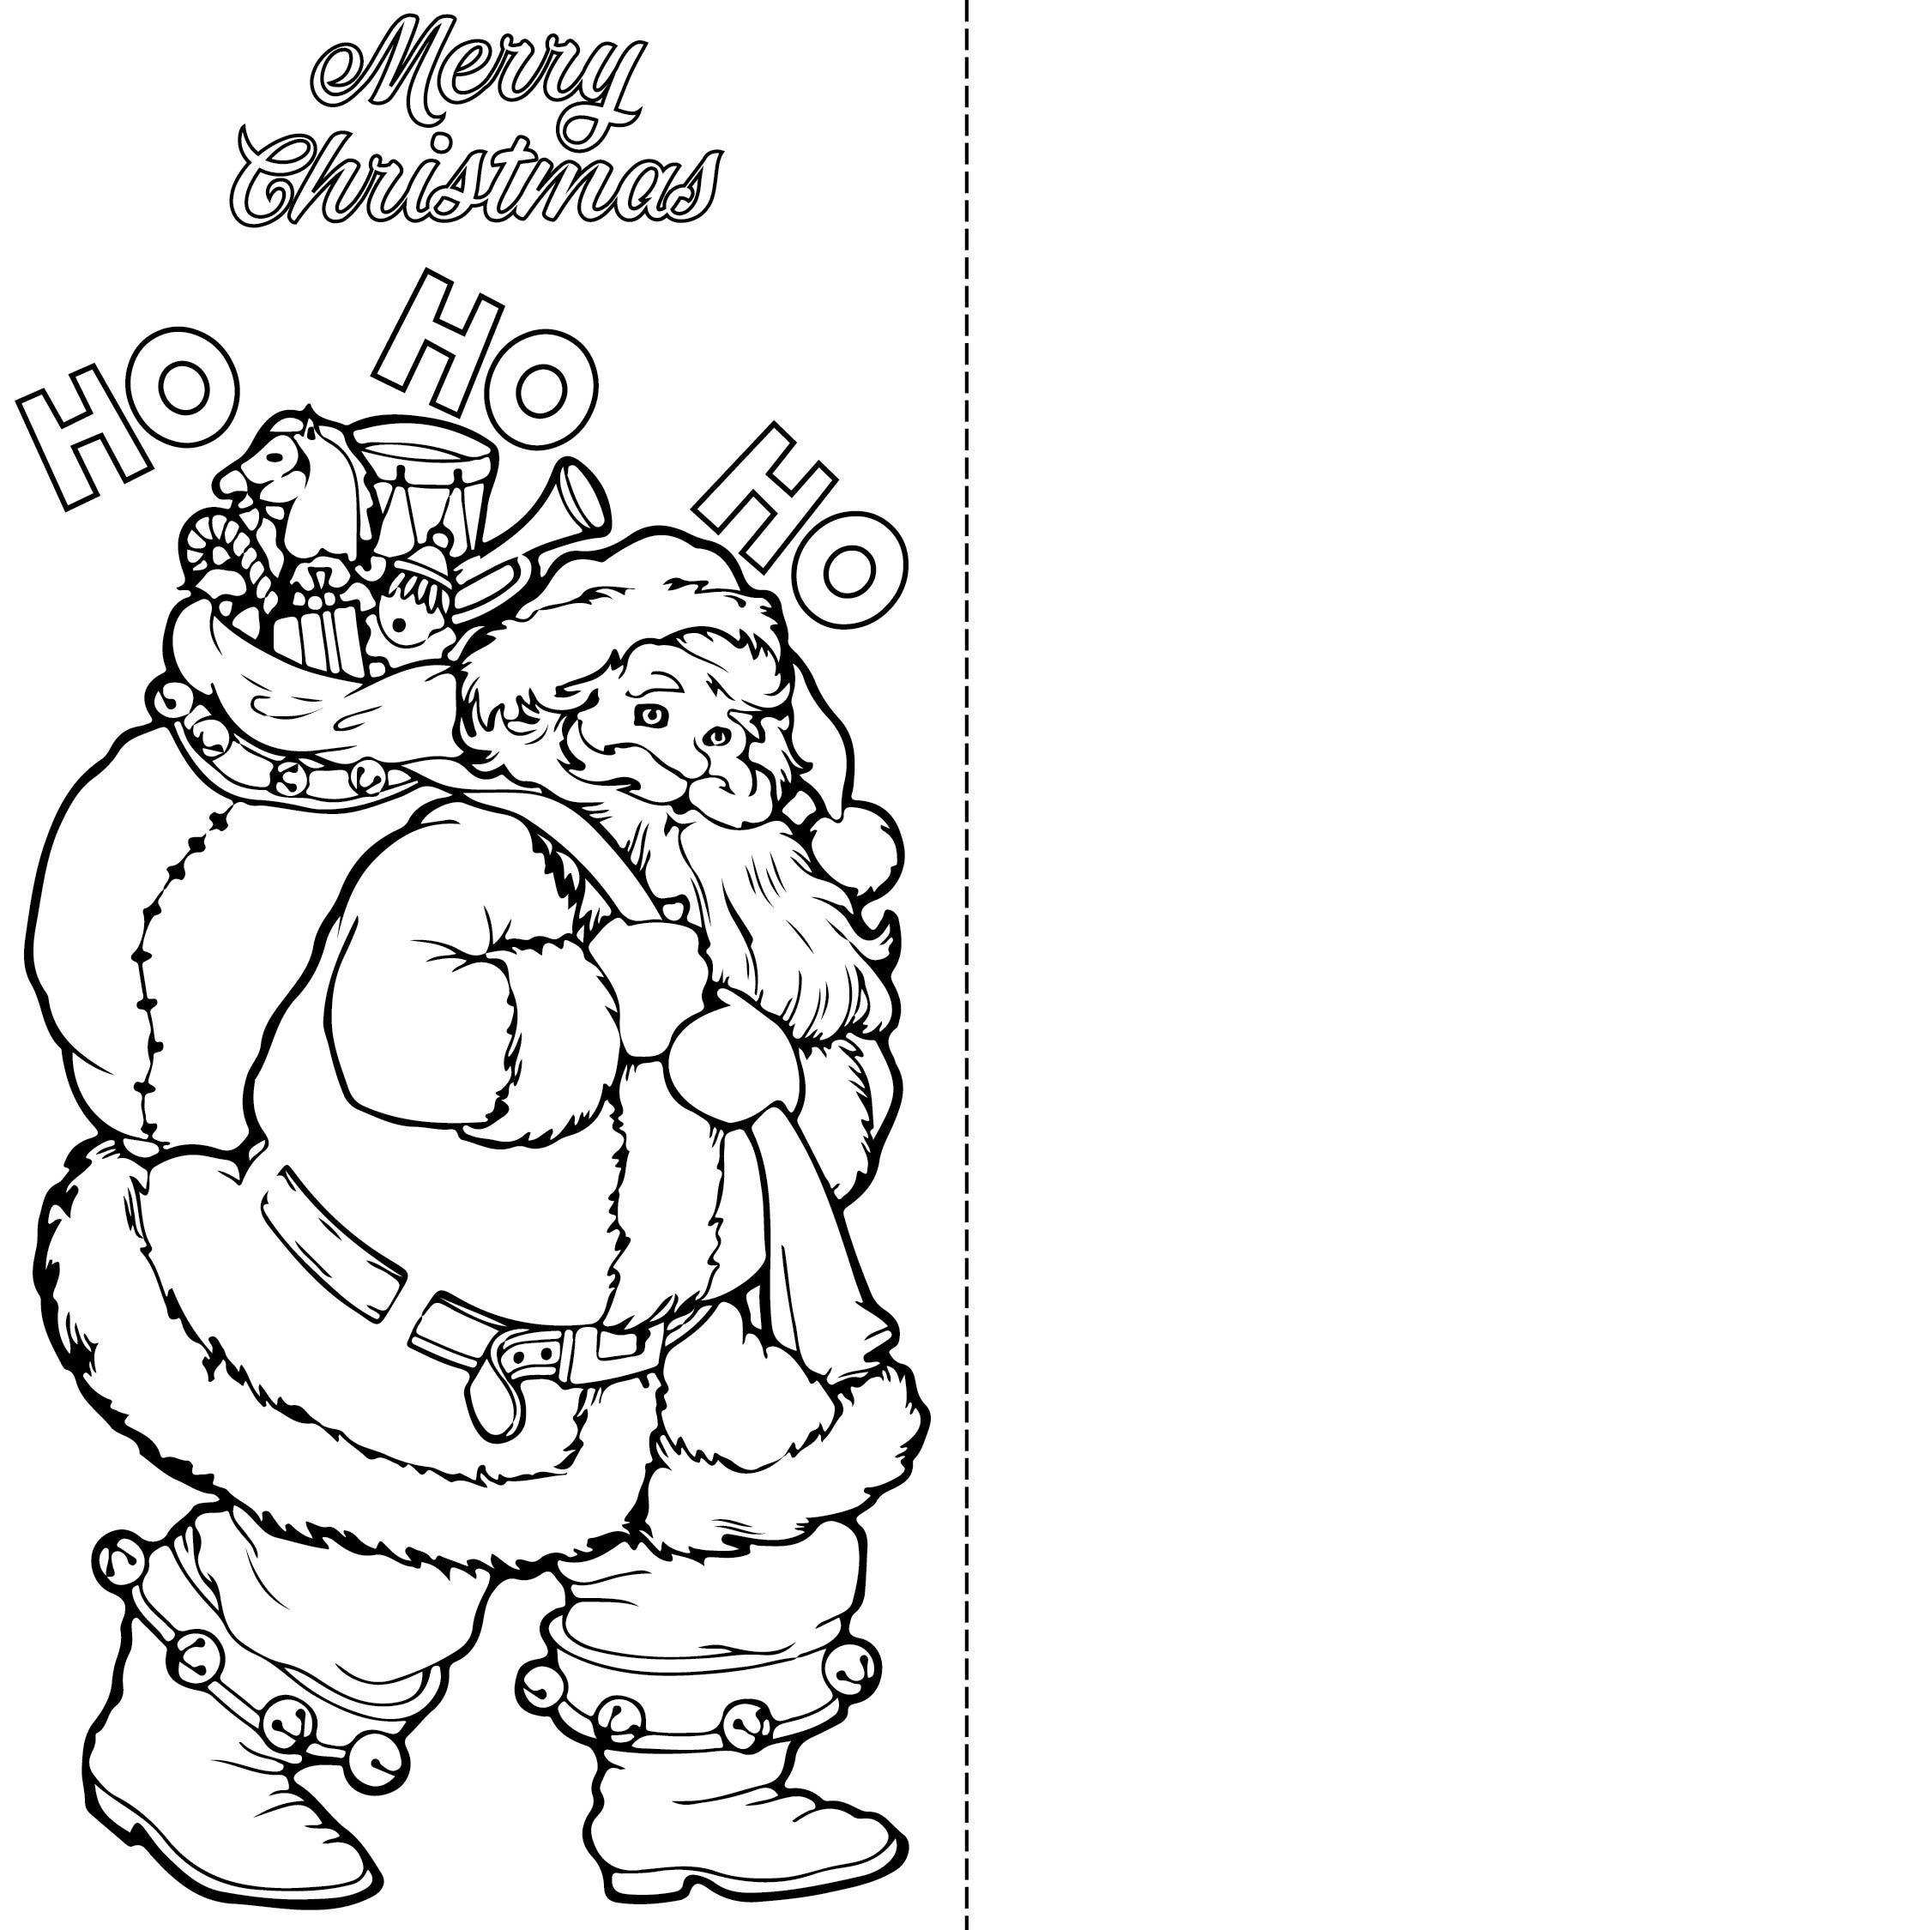 8 Best Images Of Printable Christmas Cards To Color Free Printable Christmas Cards Kids To 